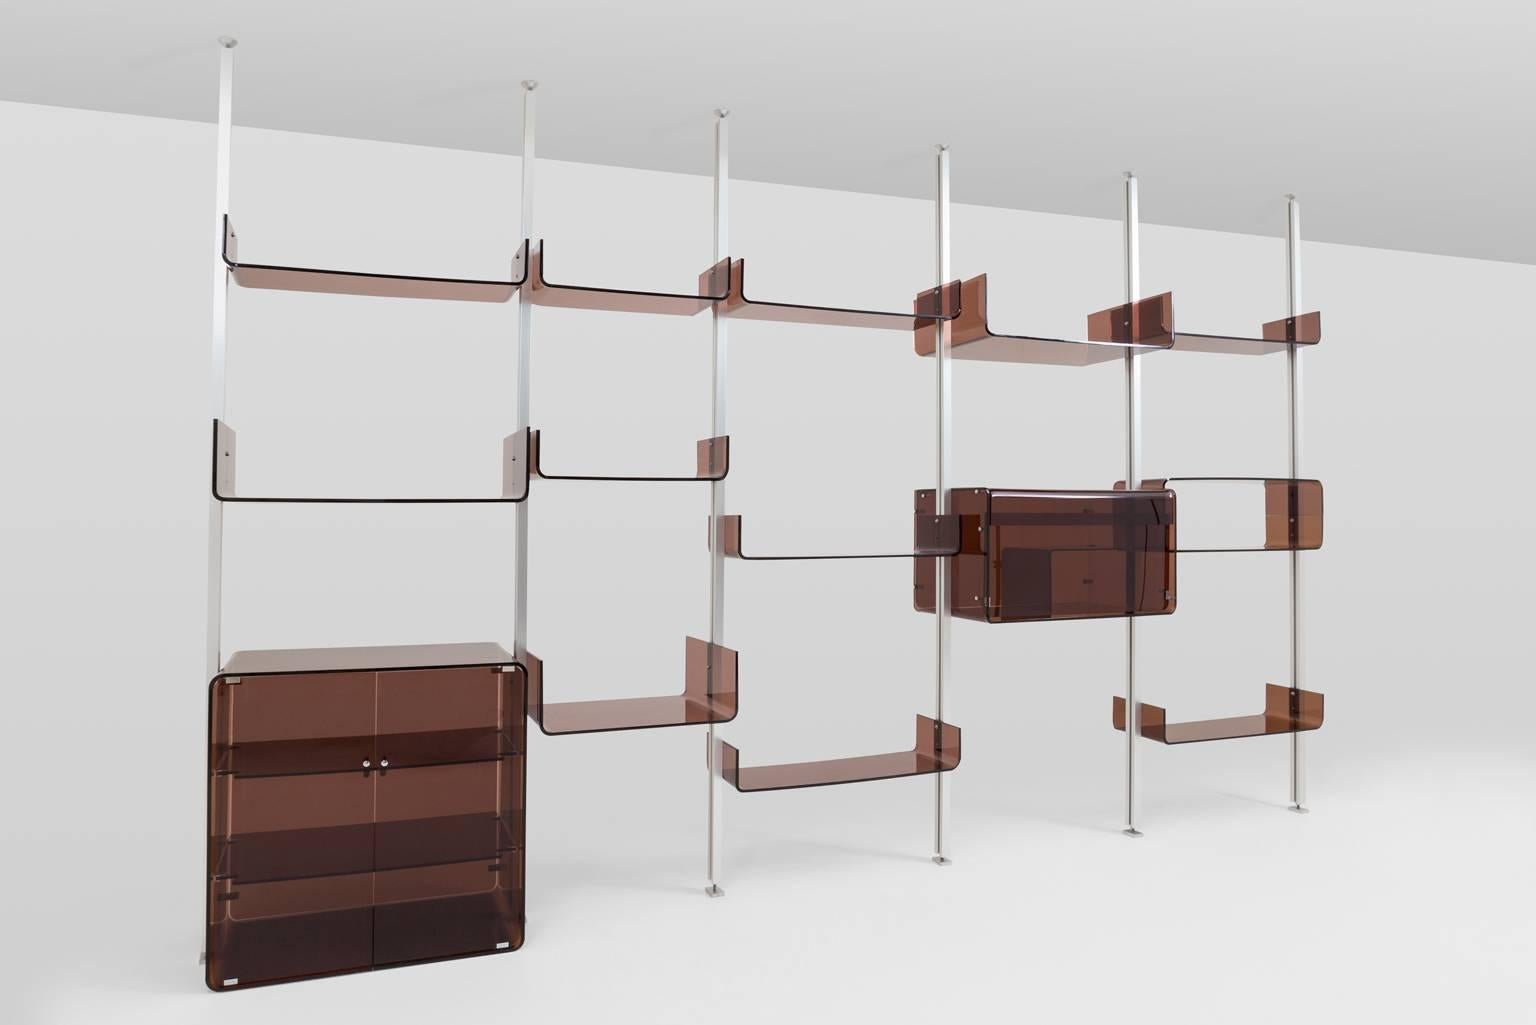 Architectonic shelving system by Michel Ducaroy for Roche Bobois, France, 1970s. The system is composed of several shelves and two cabinets made from smoked red-pink transparent Lucite (plexiglass) which can be ordened between the brushed aluminum